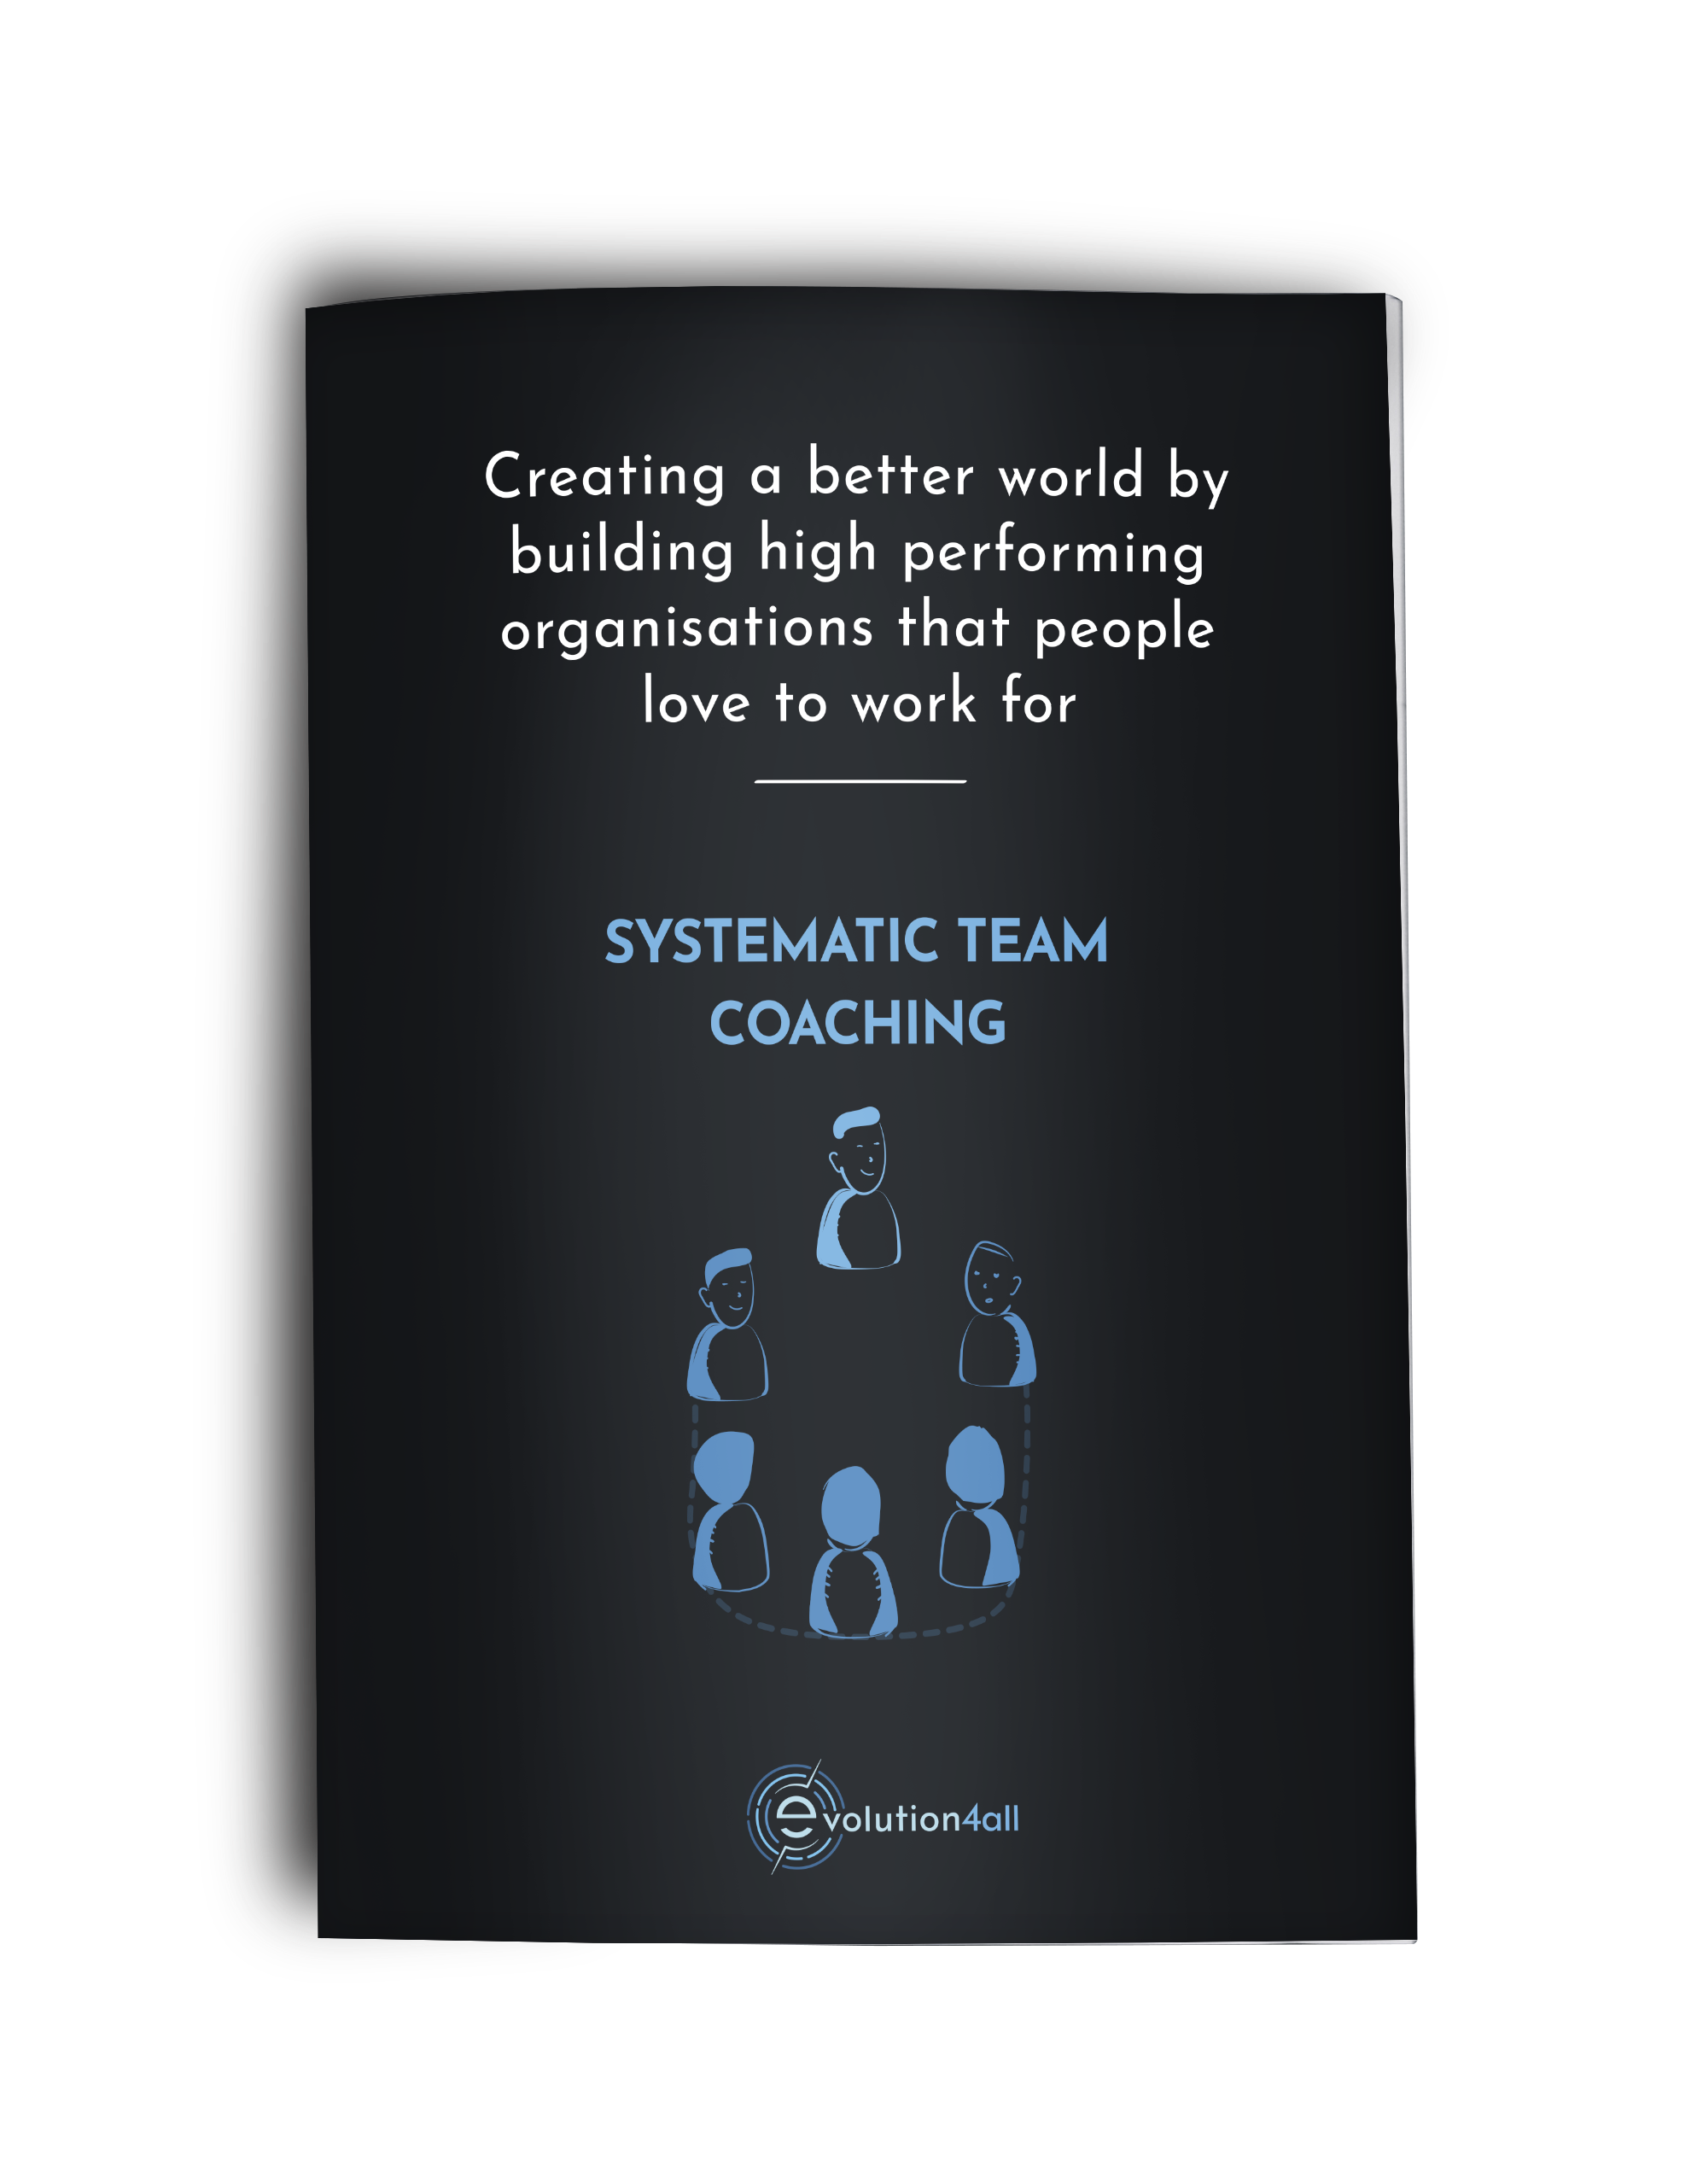 SYSTEMATIC TEAM COACHING